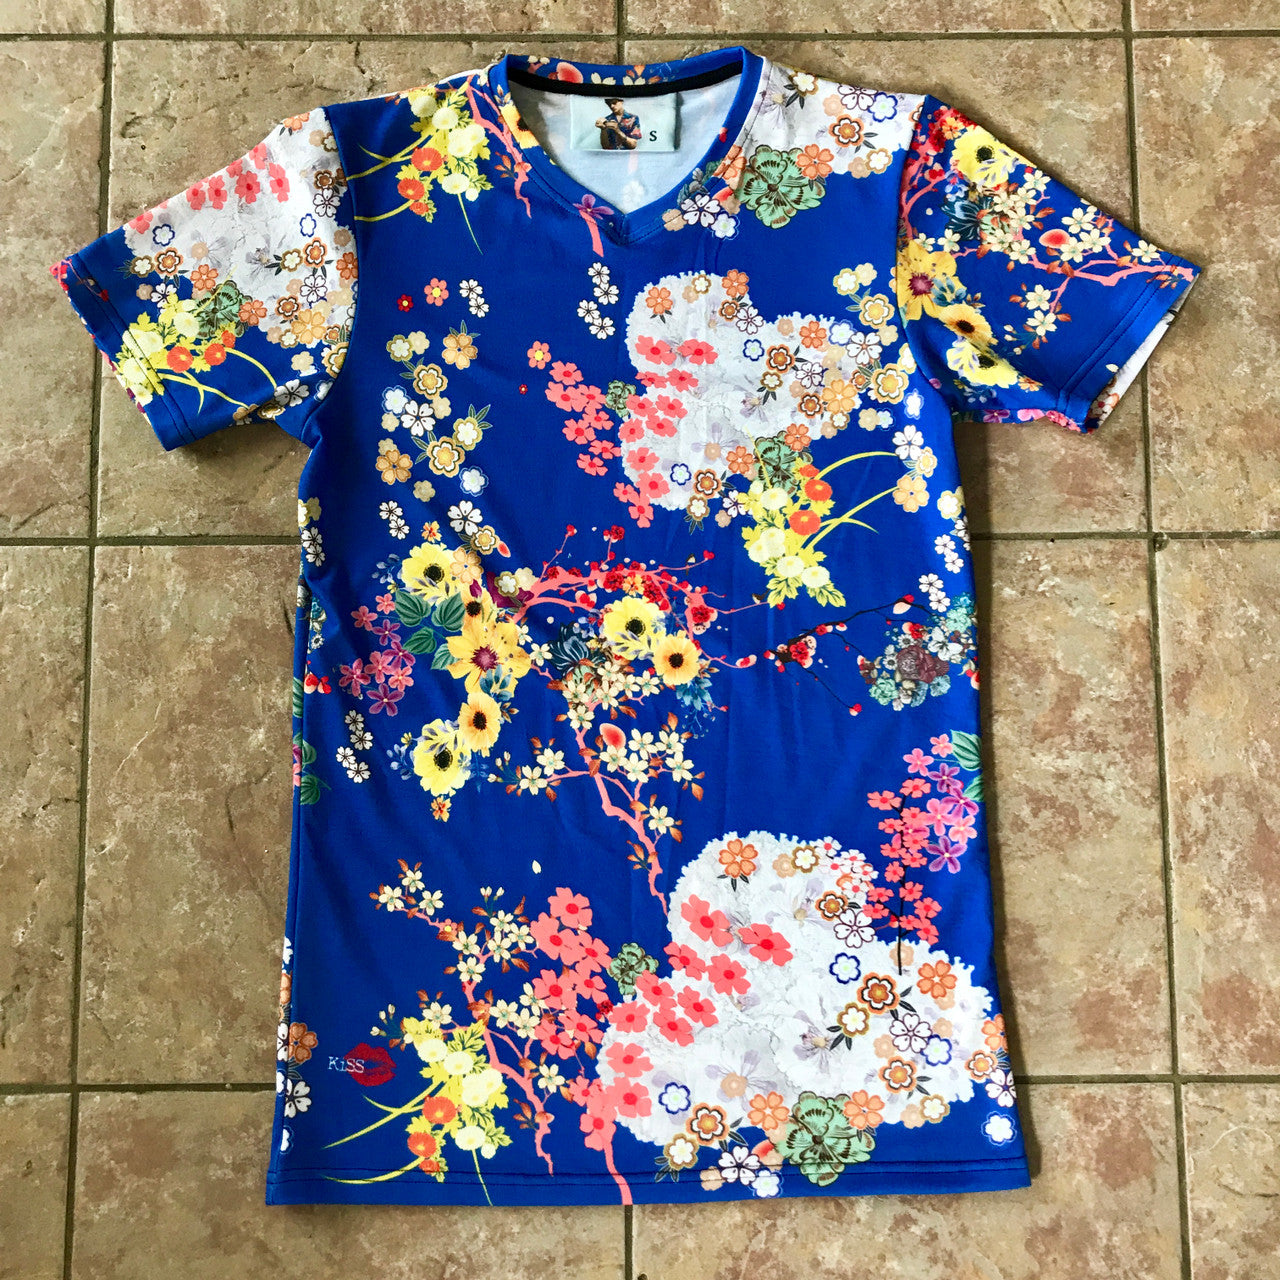 Romeo KiSS V Neck Cut & Sew T-Shirt - Japanese Flowers Floral - Leonardo DiCaprio Juliet Movie - 90s Gift for Her or Him